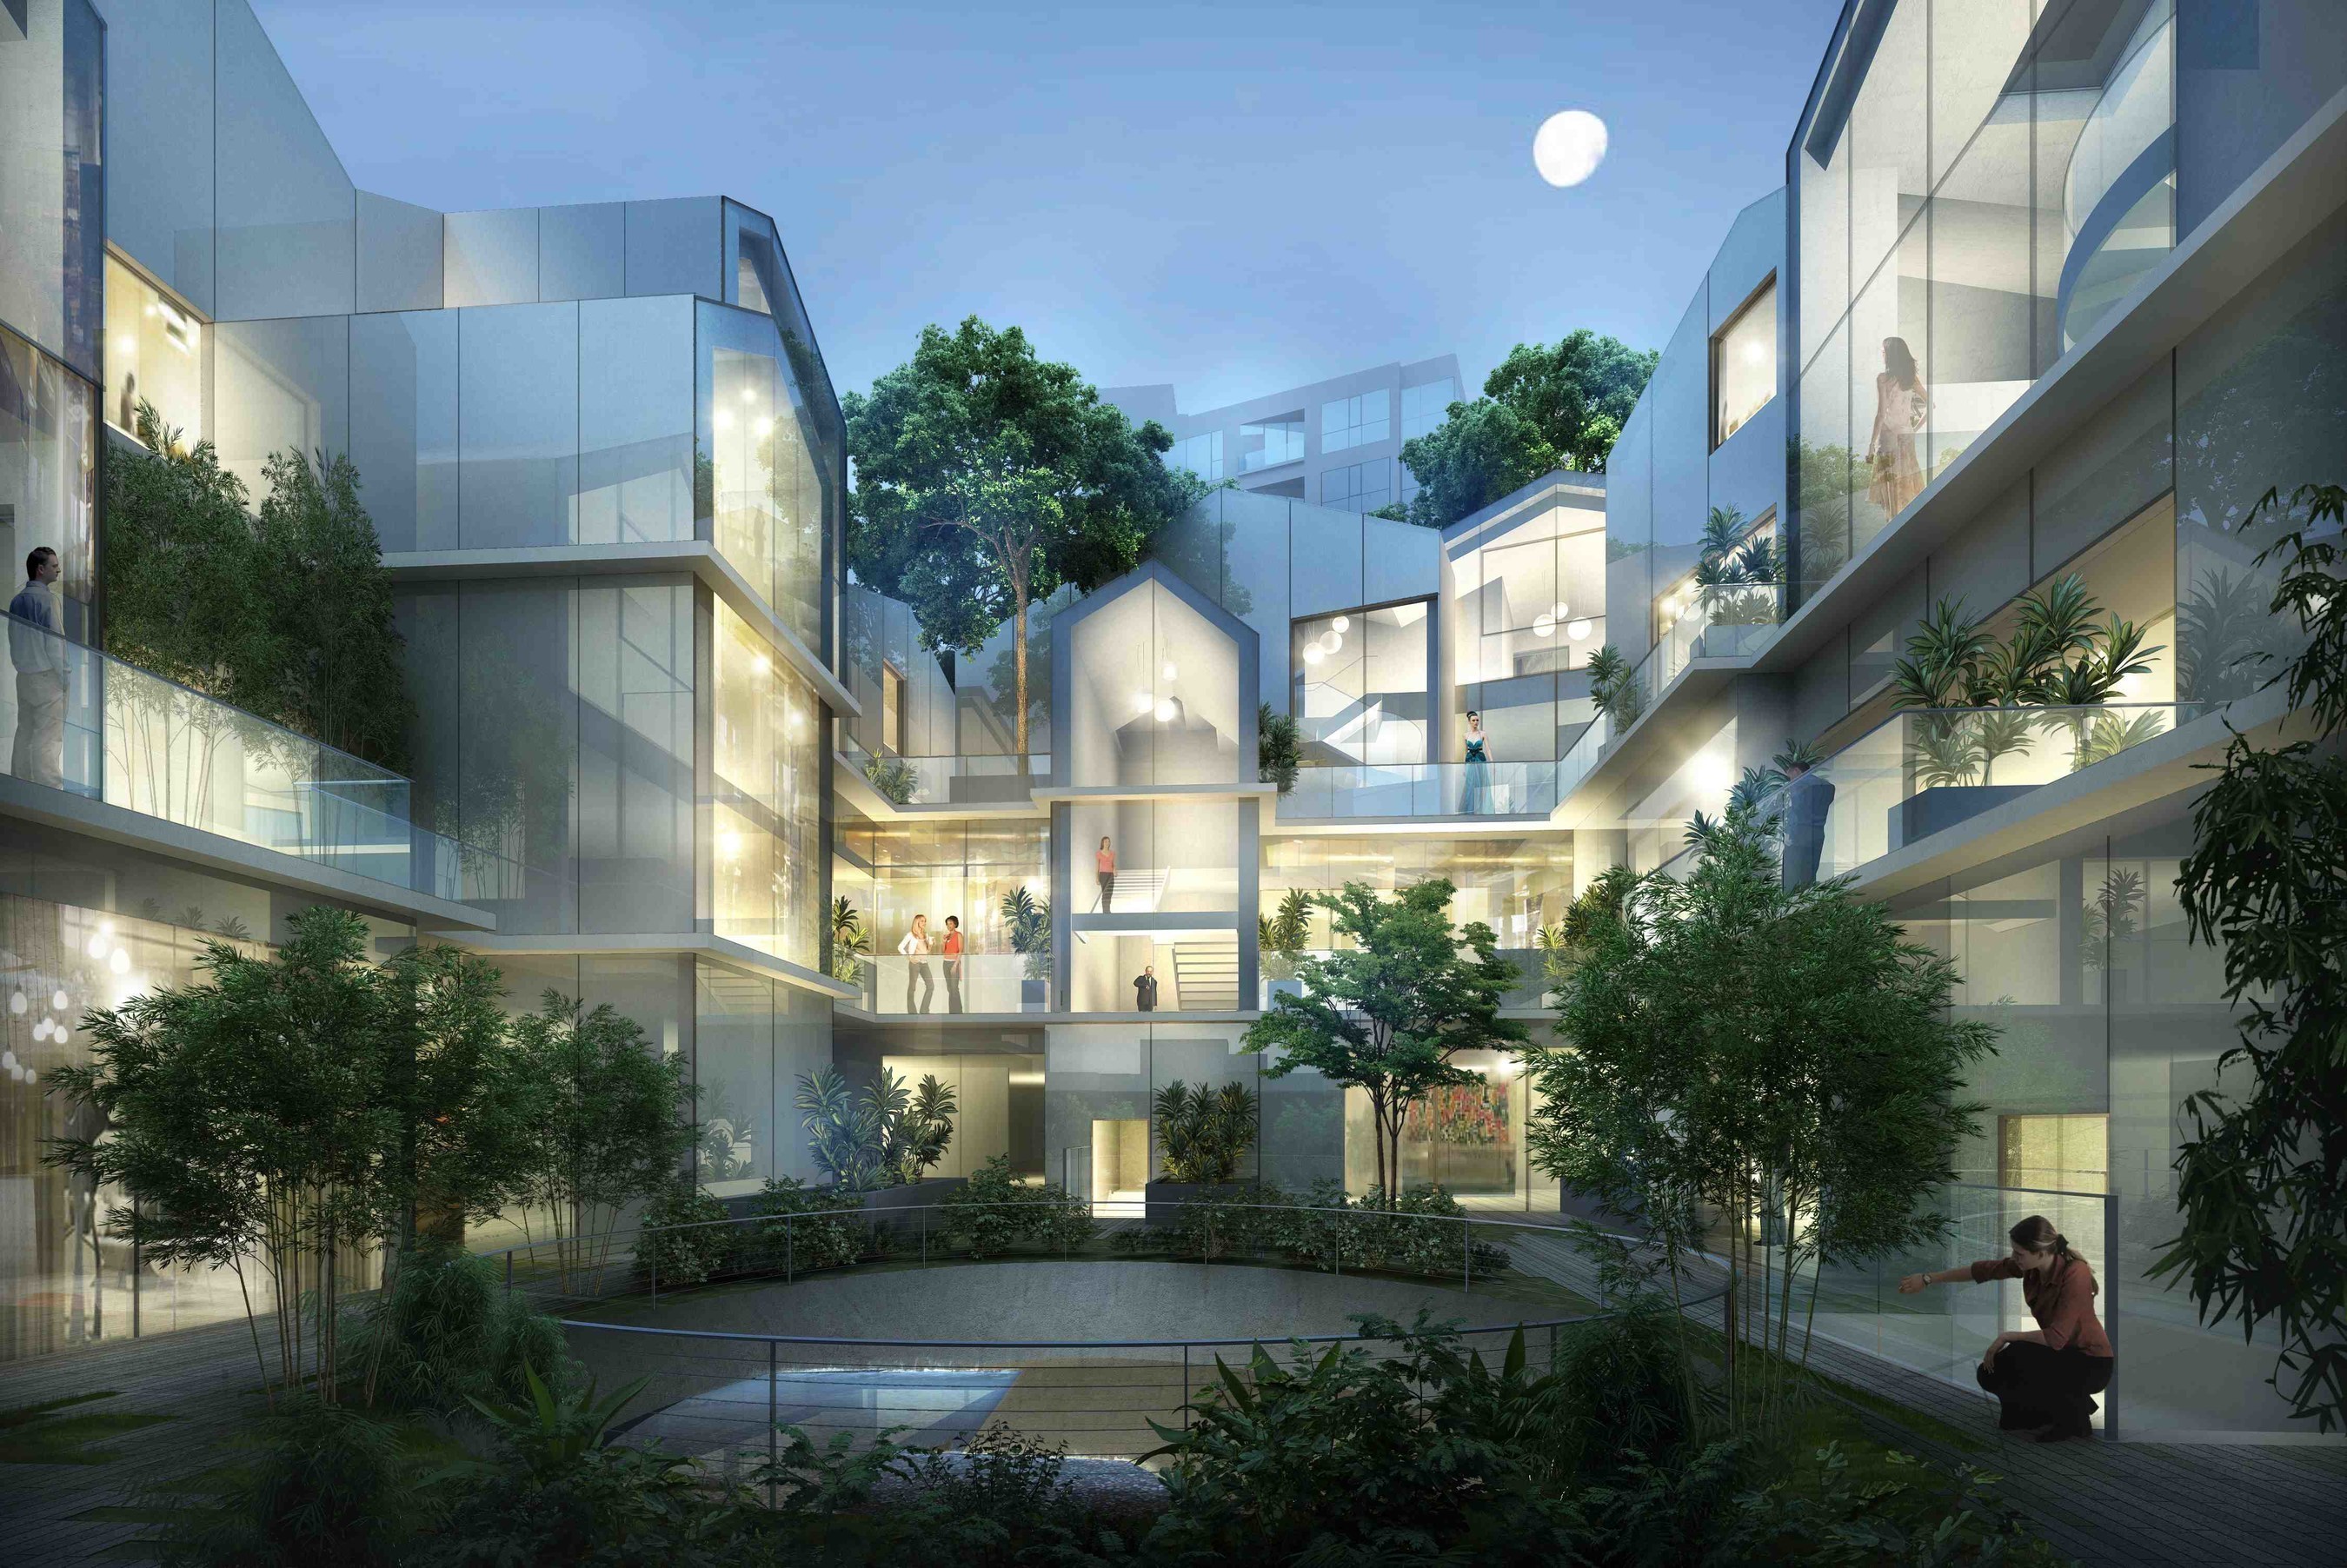 8600 Wilshire in Beverly Hills, courtyard rendering courtesy of MAD